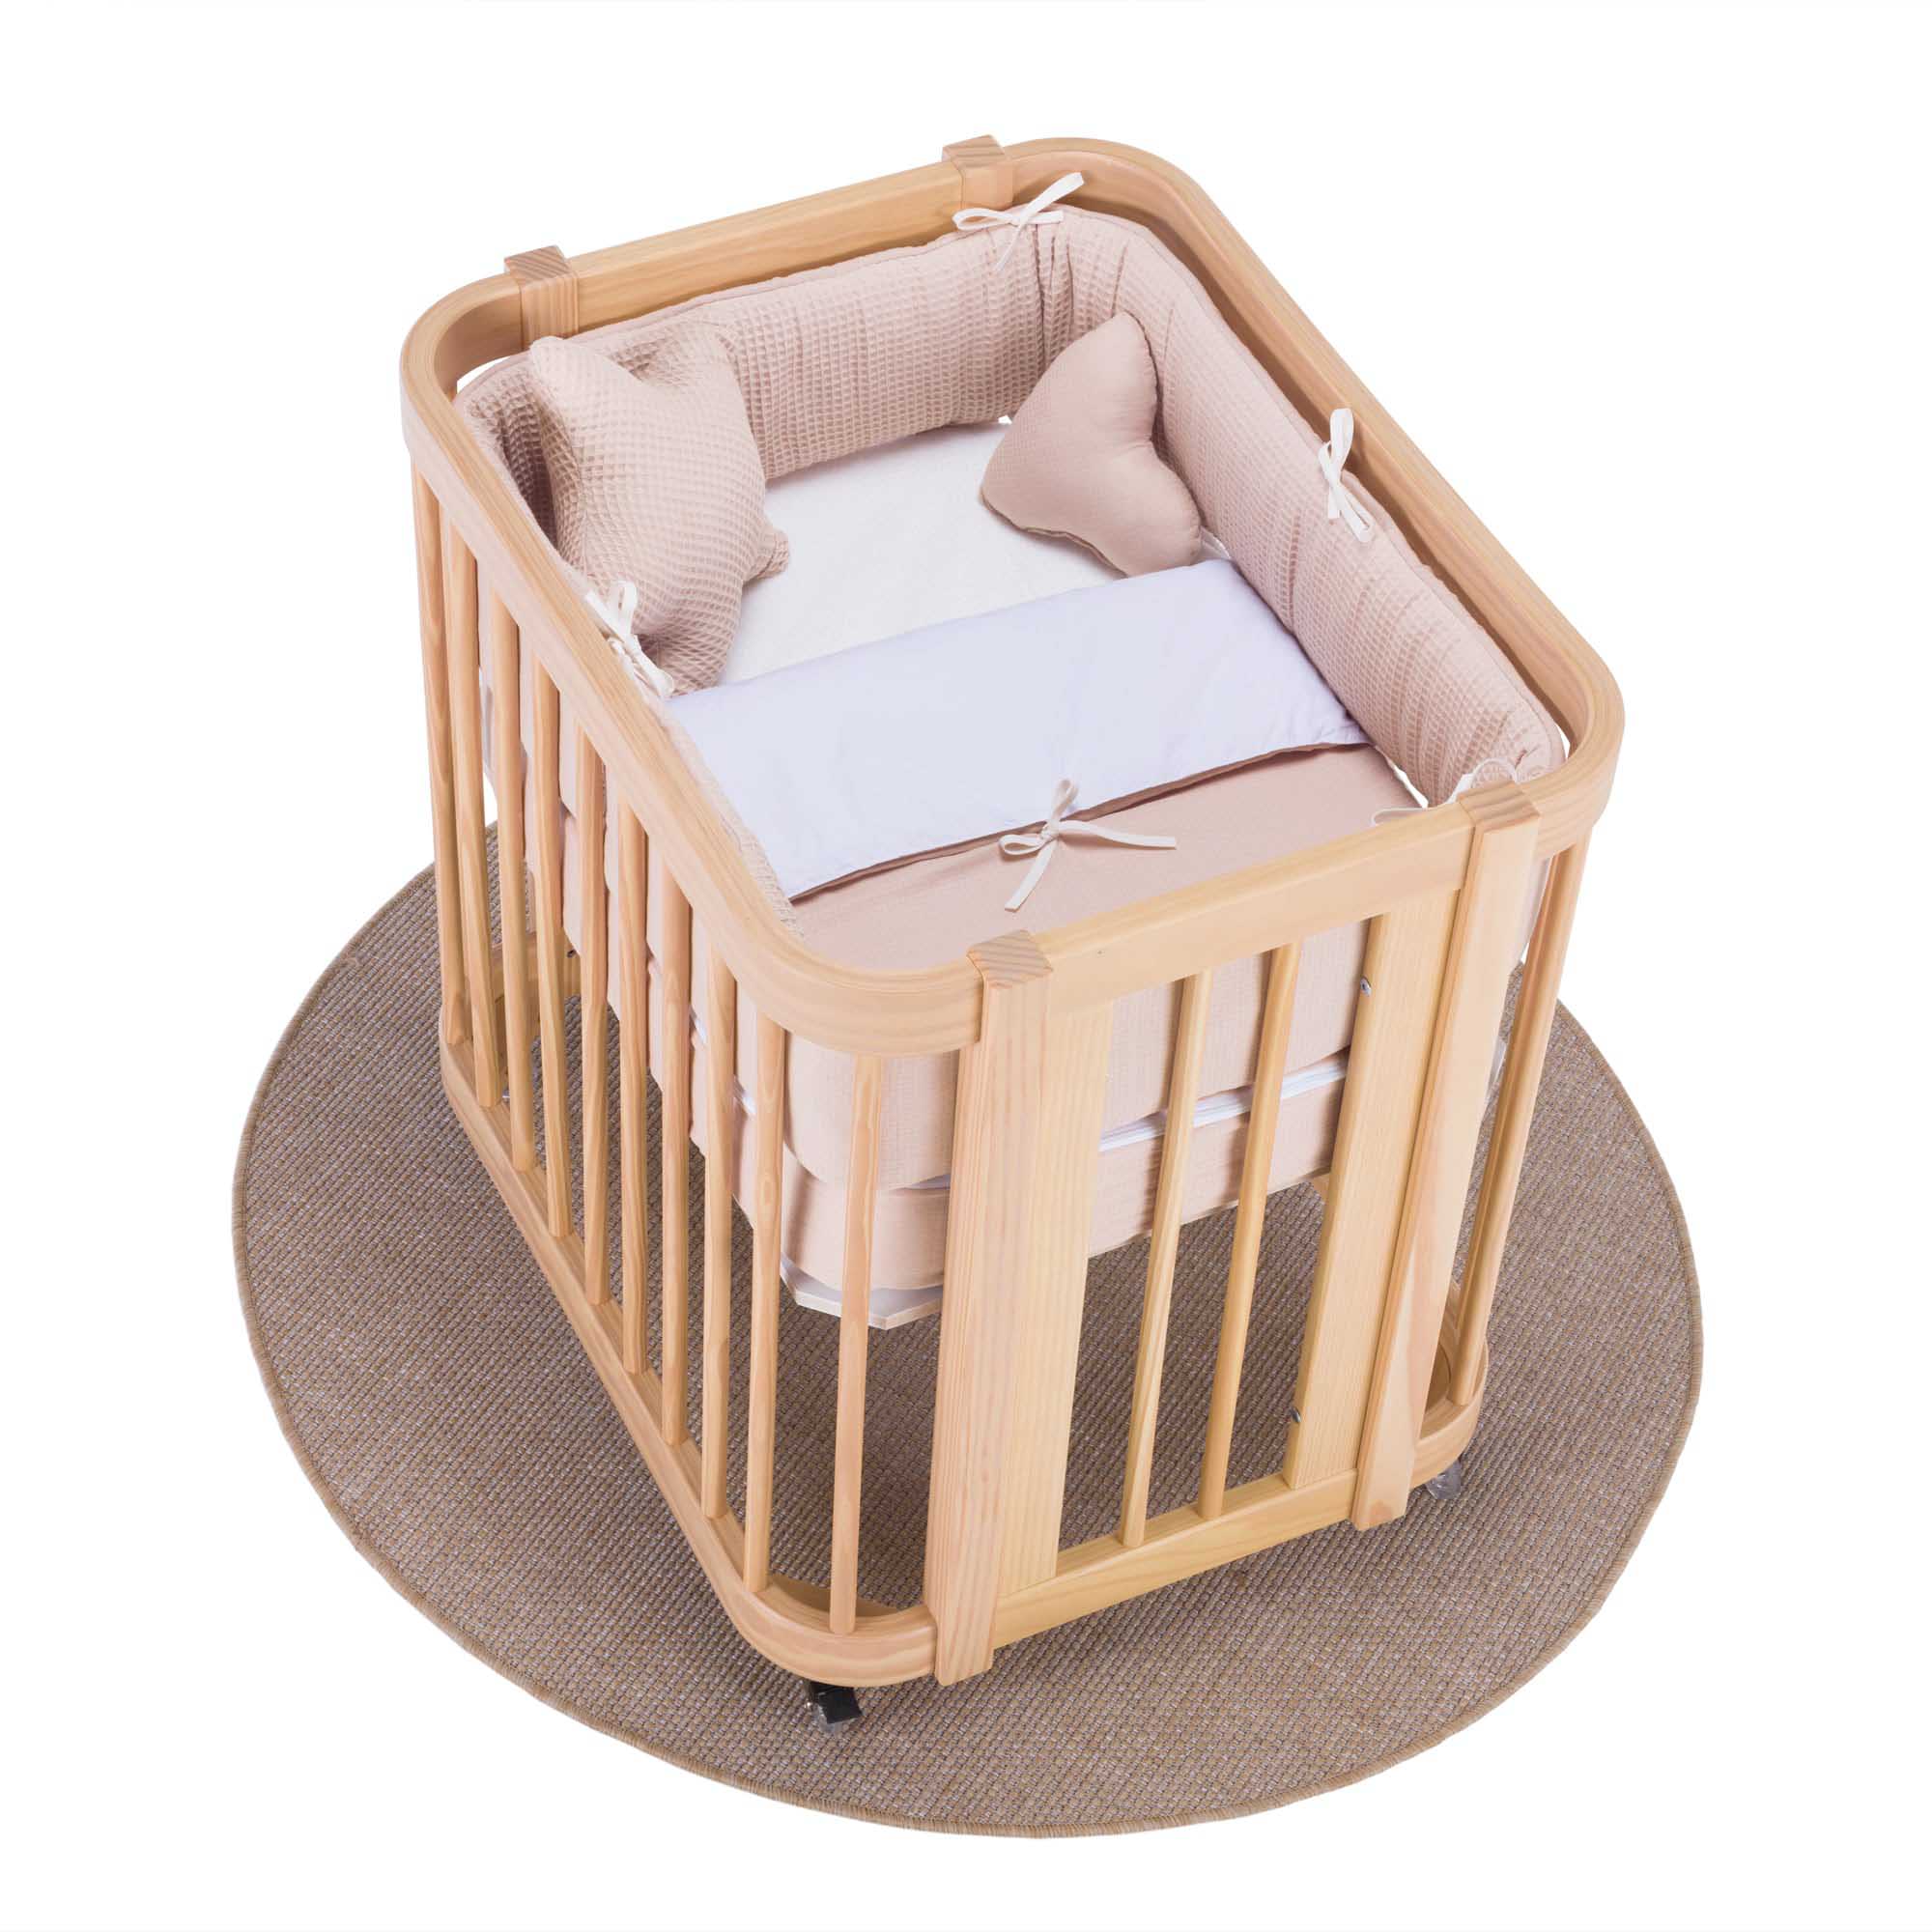 Oval baby crib 55x70cm in wooden colour